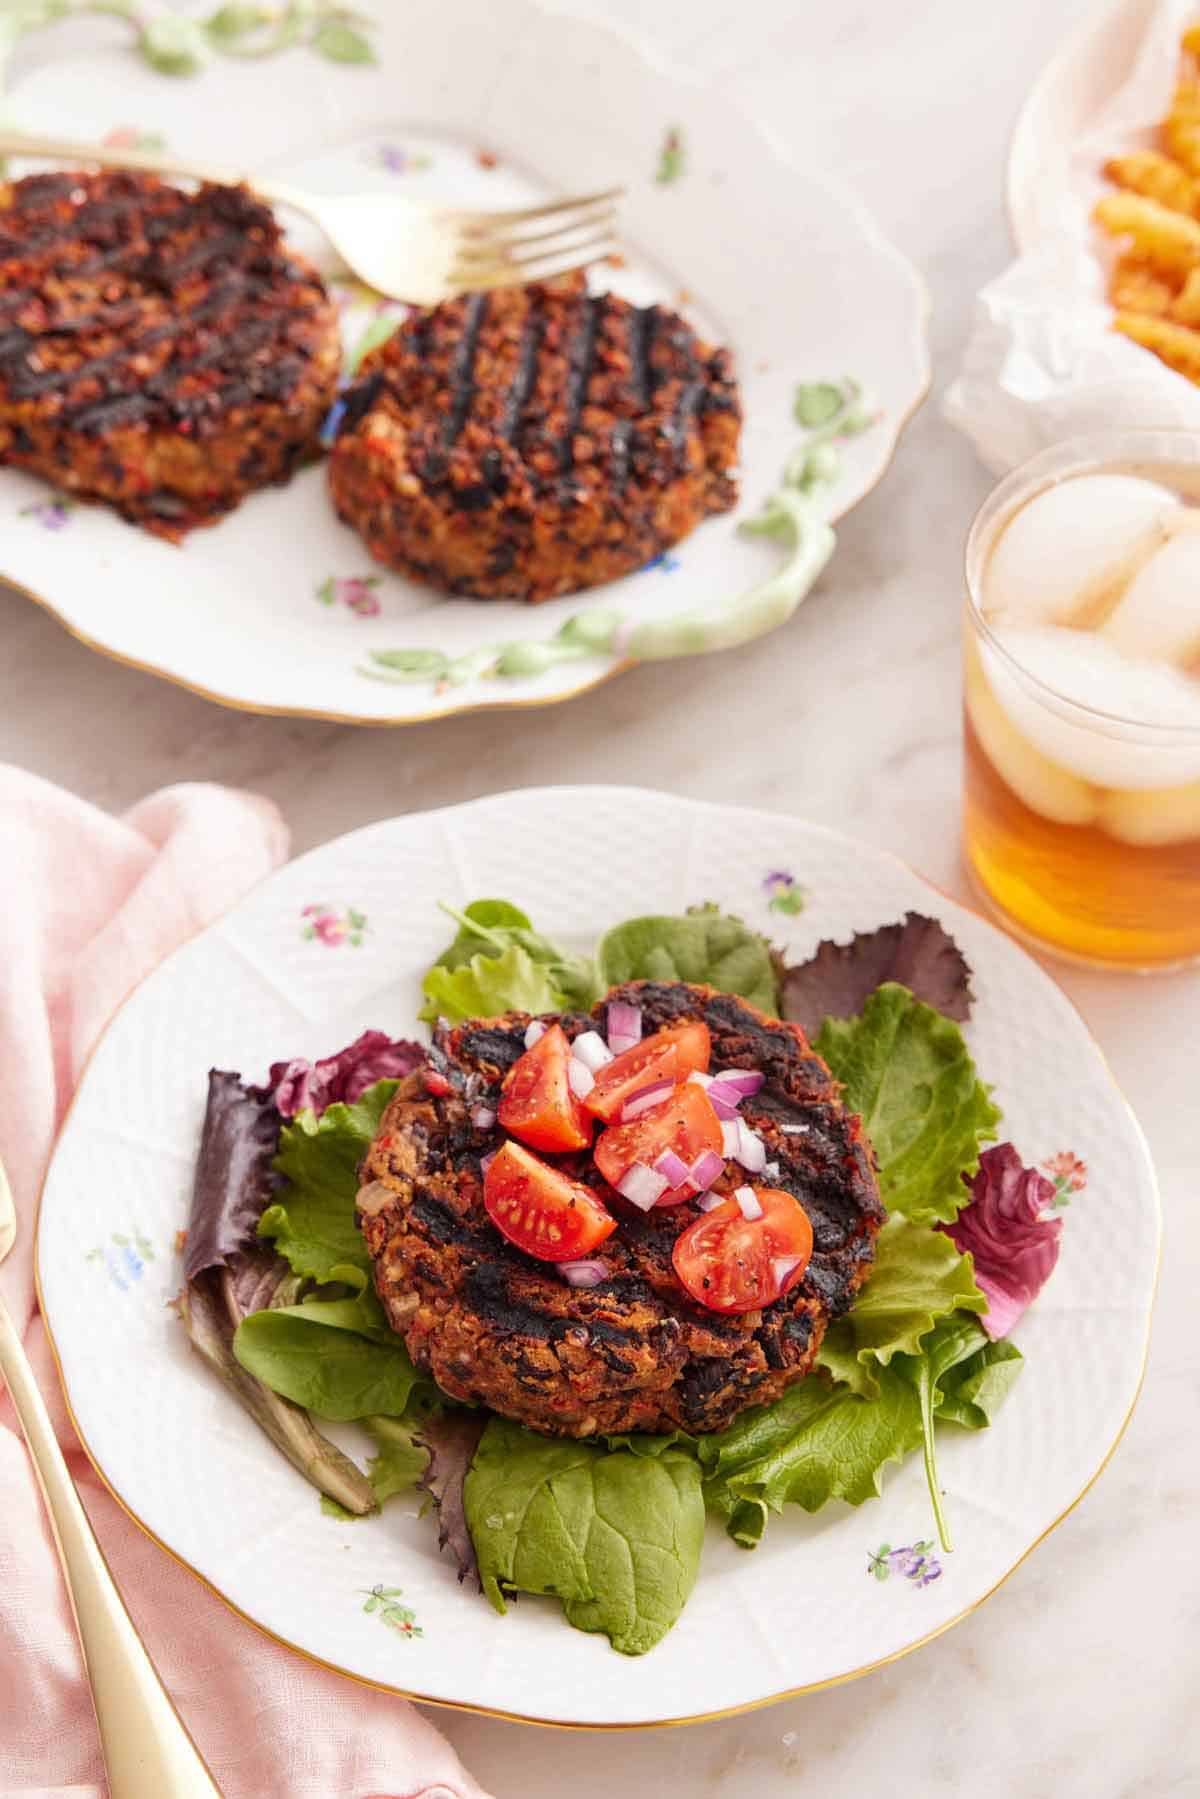 A plate with a black bean burger patty topped with tomatoes and red onions over a bed of lettuce. More patties in the background.